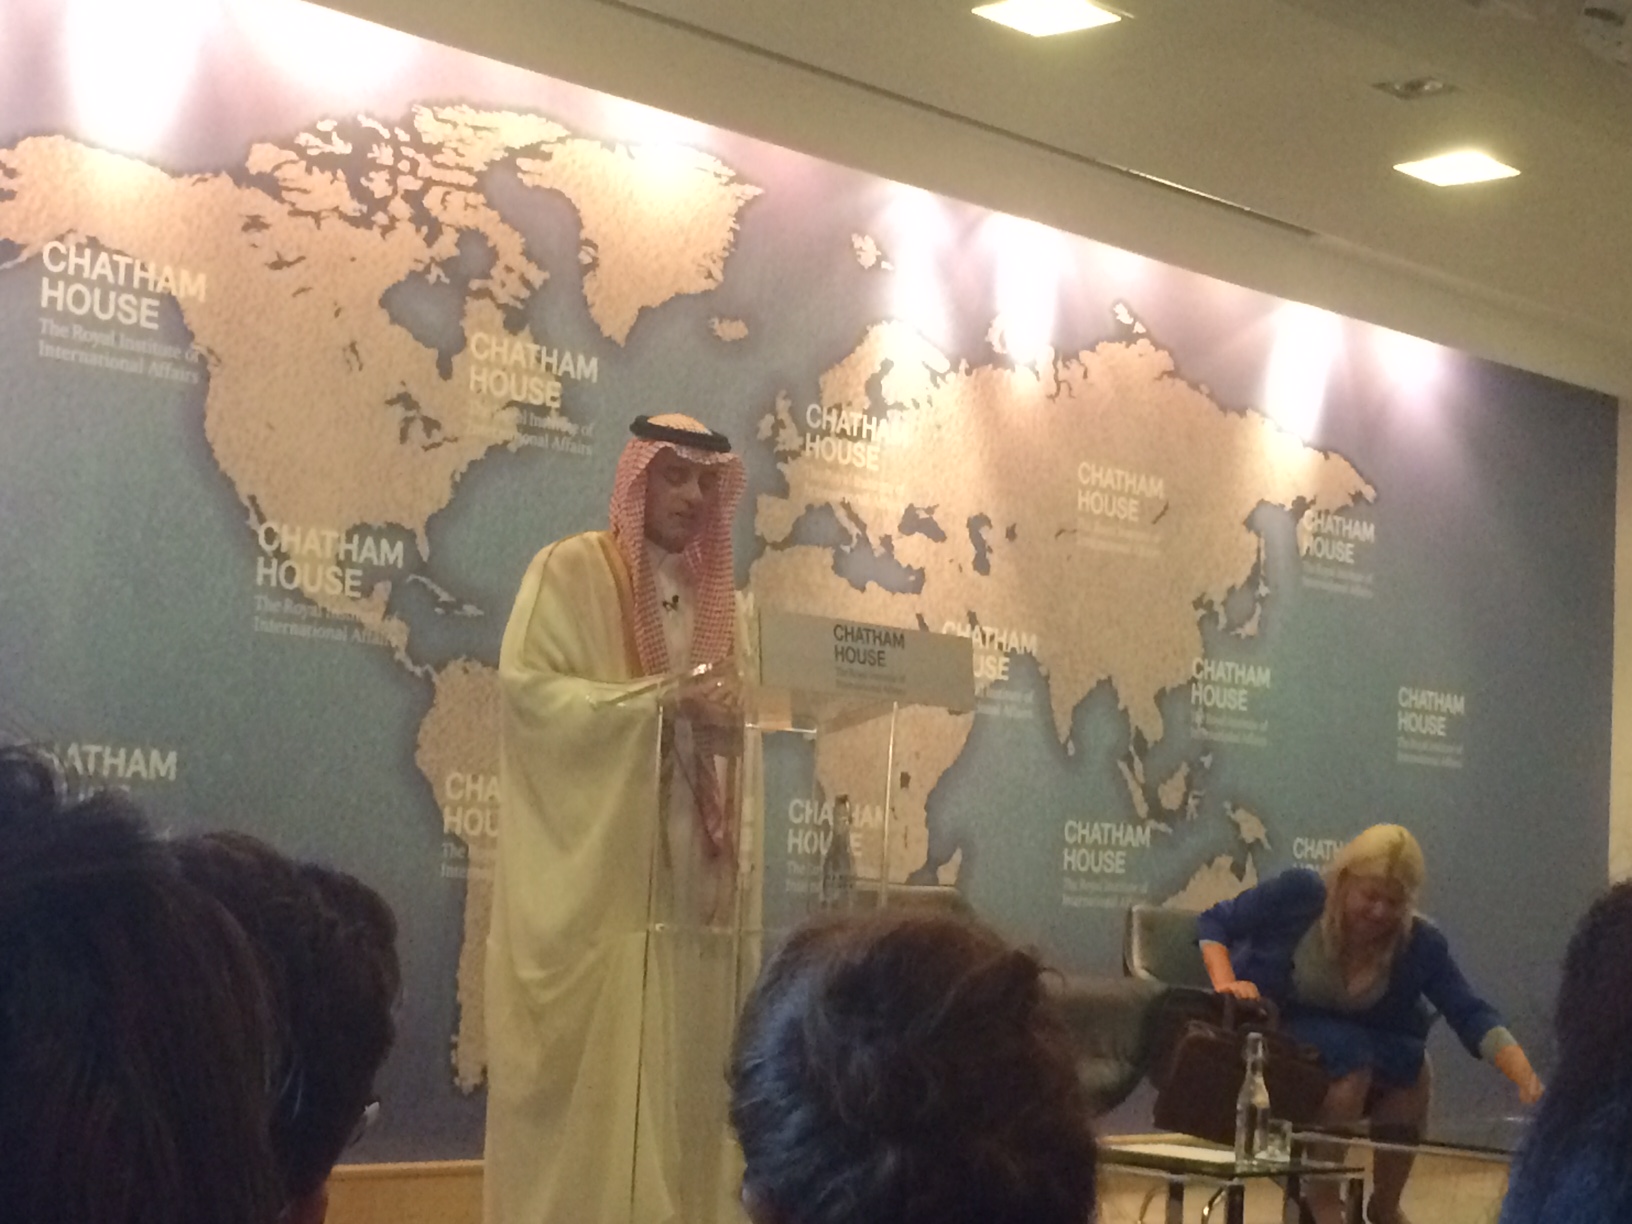 Saudi Foreign Minister Adel Al-Jubeir during the Royal Institute of International Affairs (Chatham House) symposium in London